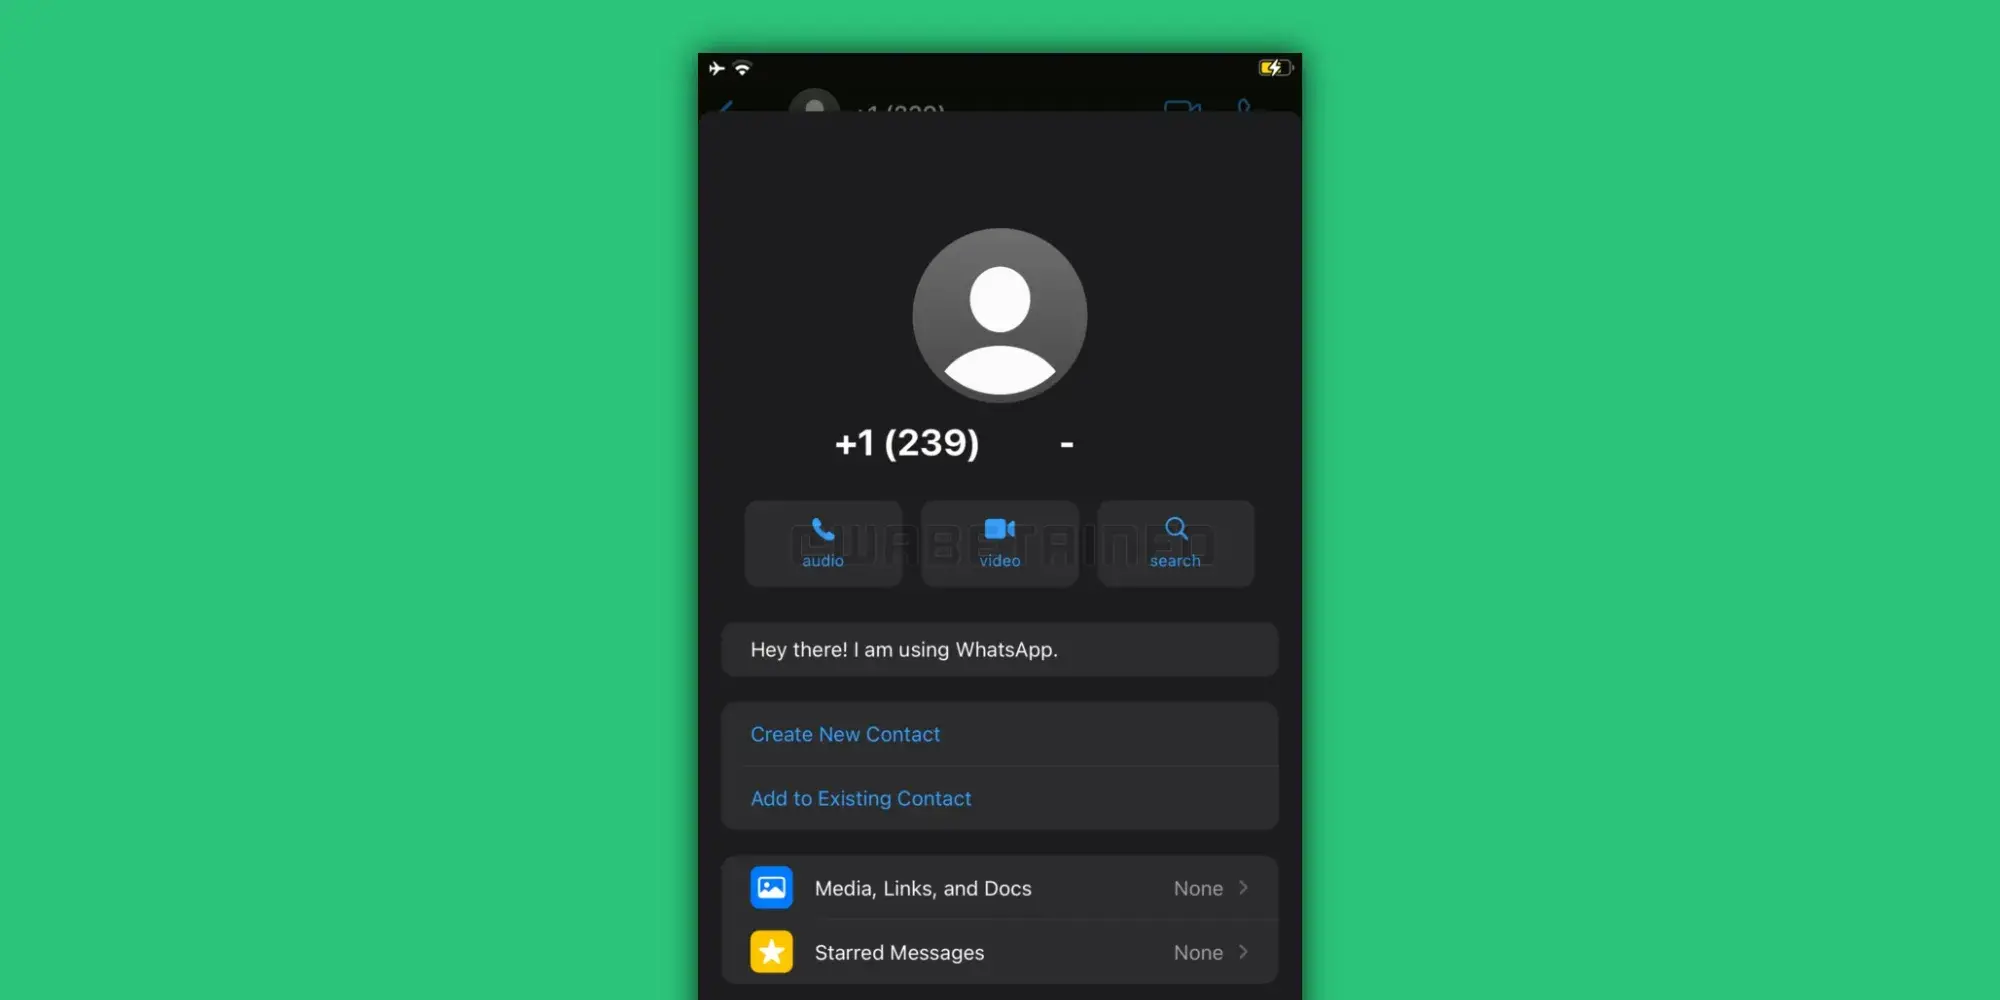 WhatsApp for iOS has a new Contact Info page in the works